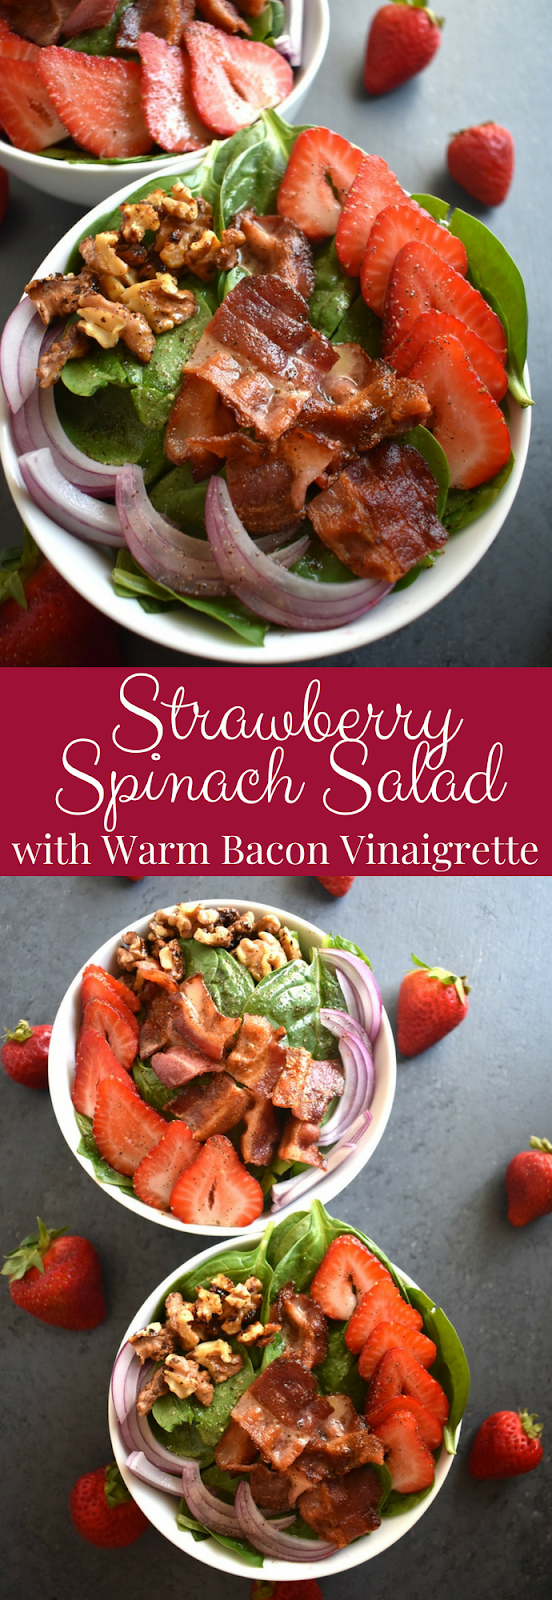 Strawberry Spinach Salad with Warm Bacon Vinaigrette is the perfect salad with red onions, strawberries, crispy bacon, toasted nuts and a warm bacon dressing! www.nutritionistreviews.com